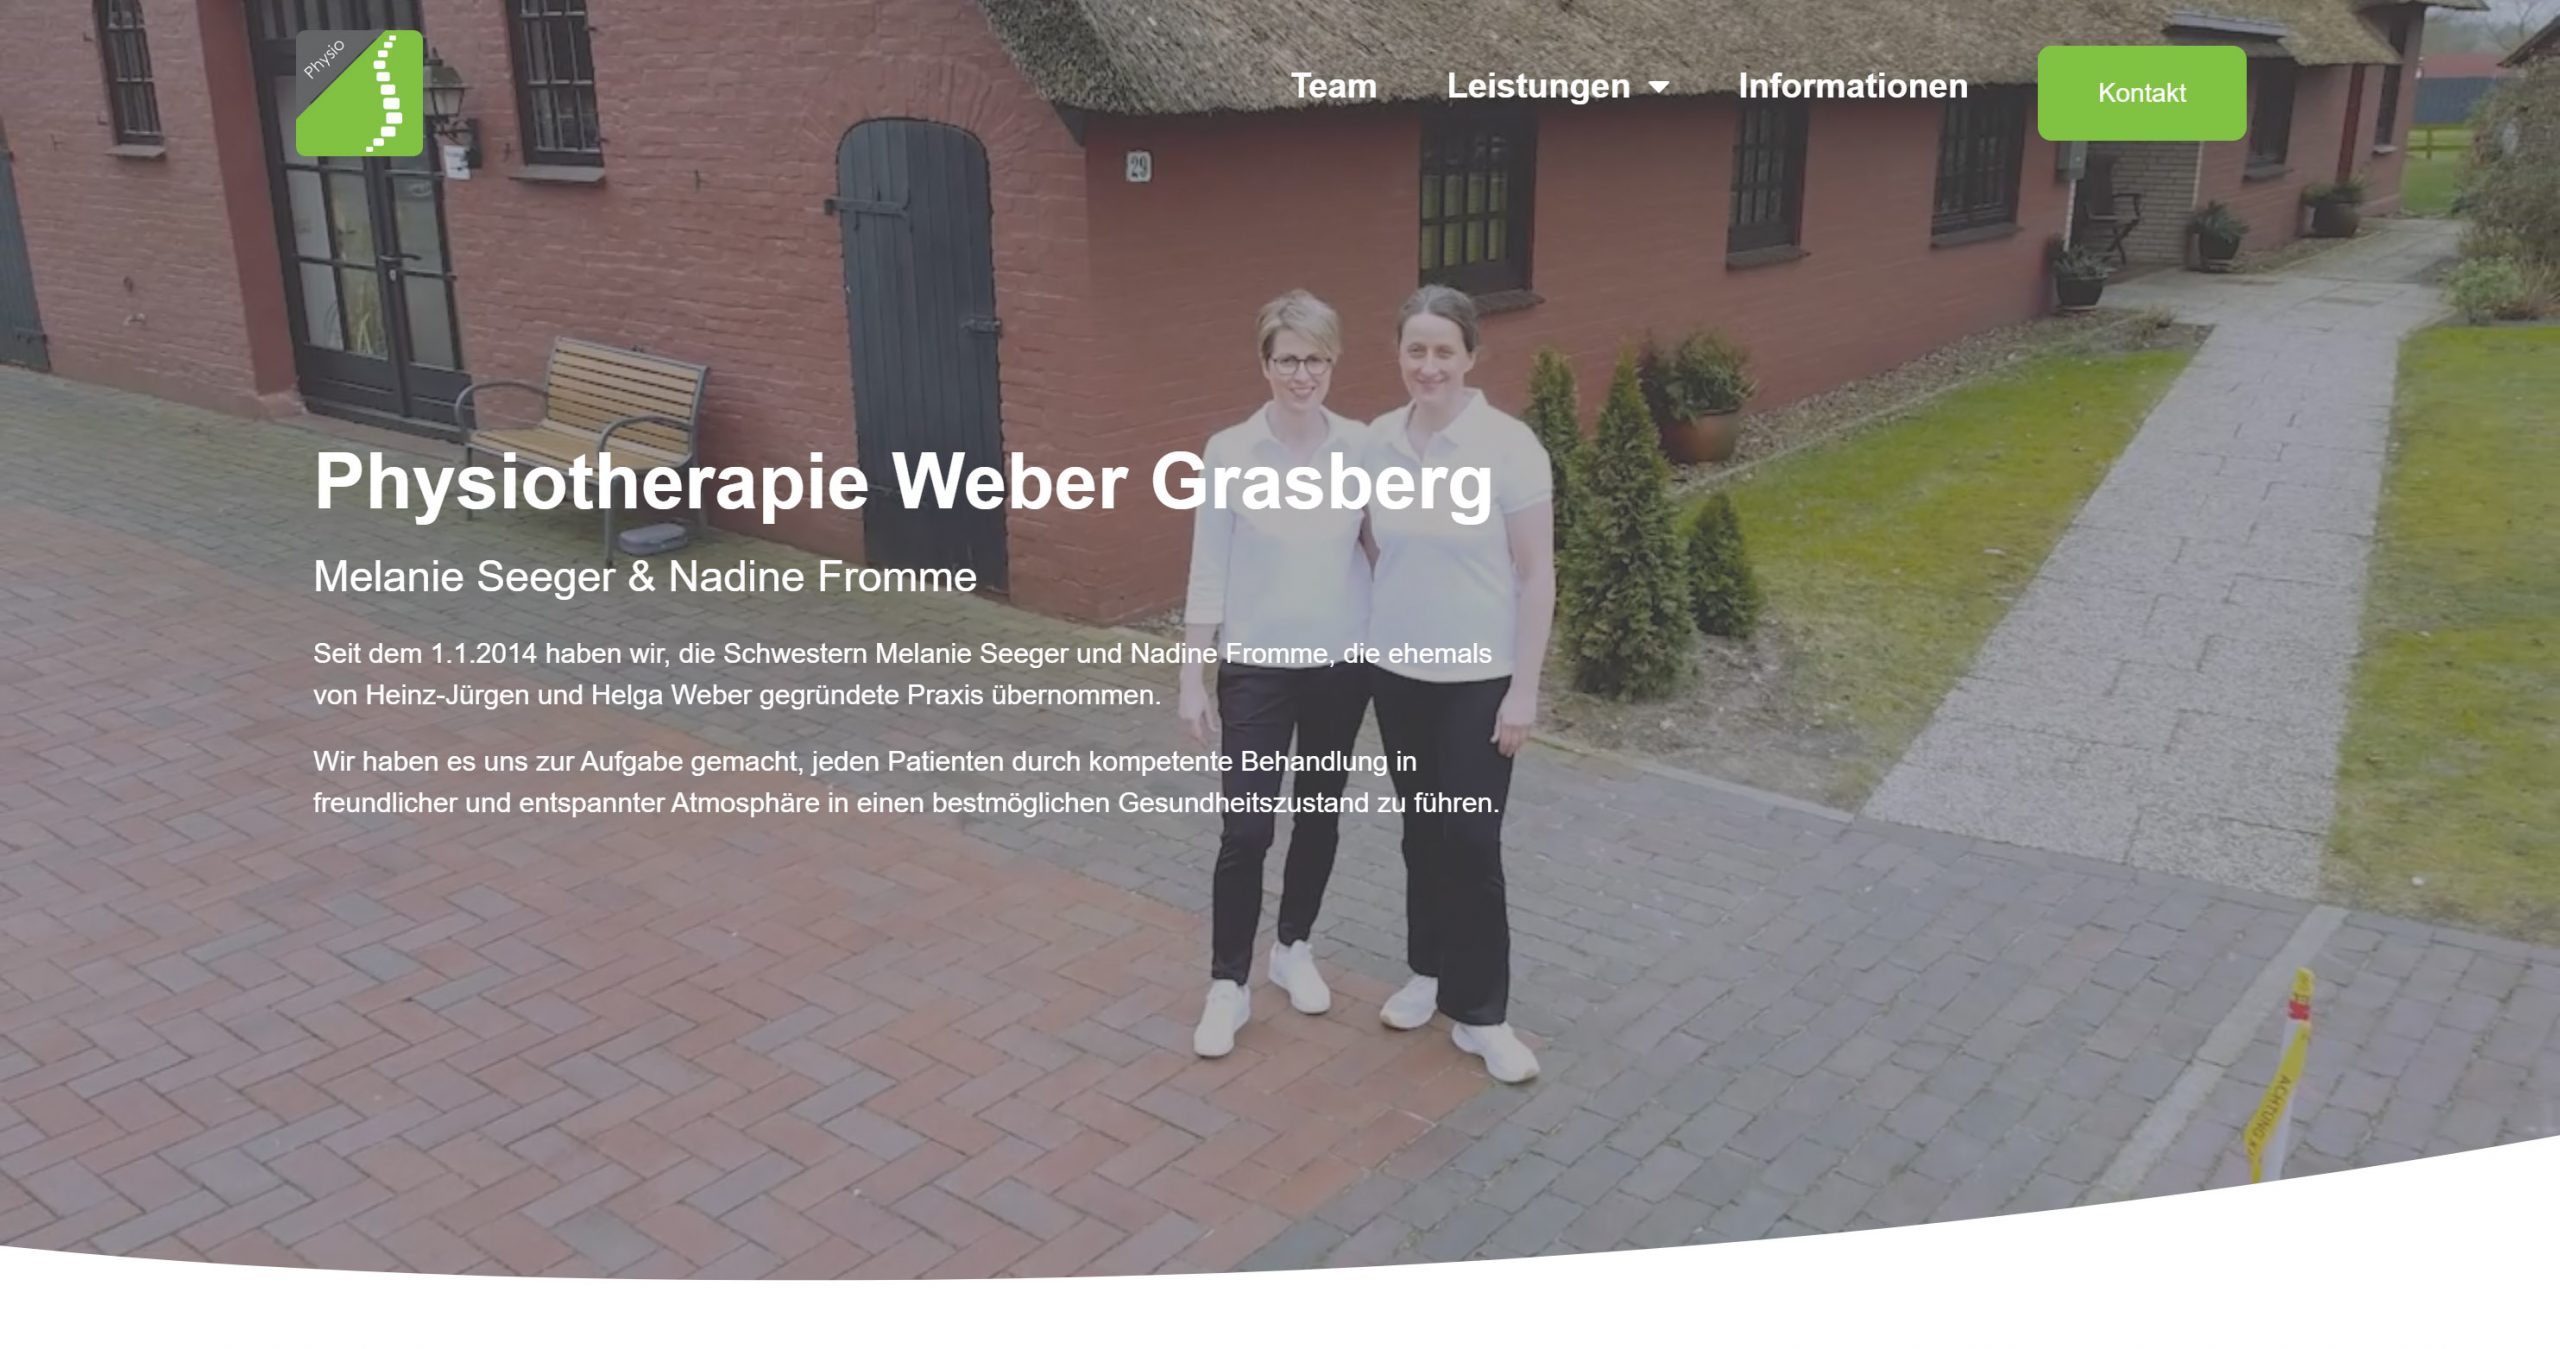 Physiotherapie-Weber-Praxis-Seeger-Fromme-Grasberg